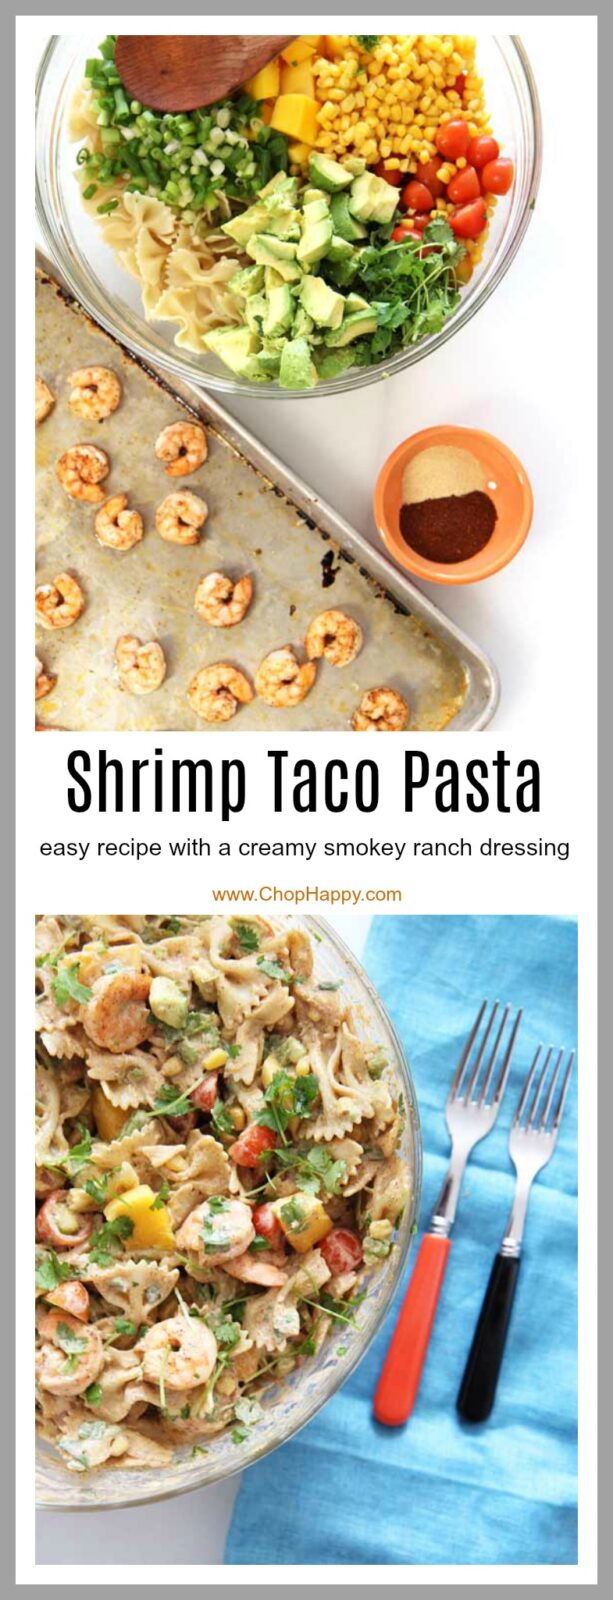 Shrimp Taco Pasta Recipe. This recipe is creamy, smokey, and so hearty good. There are leftovers you will crave for days. Feel free to substitute shrimp for leftover chicken, beef or veggies. www.chophappy.com